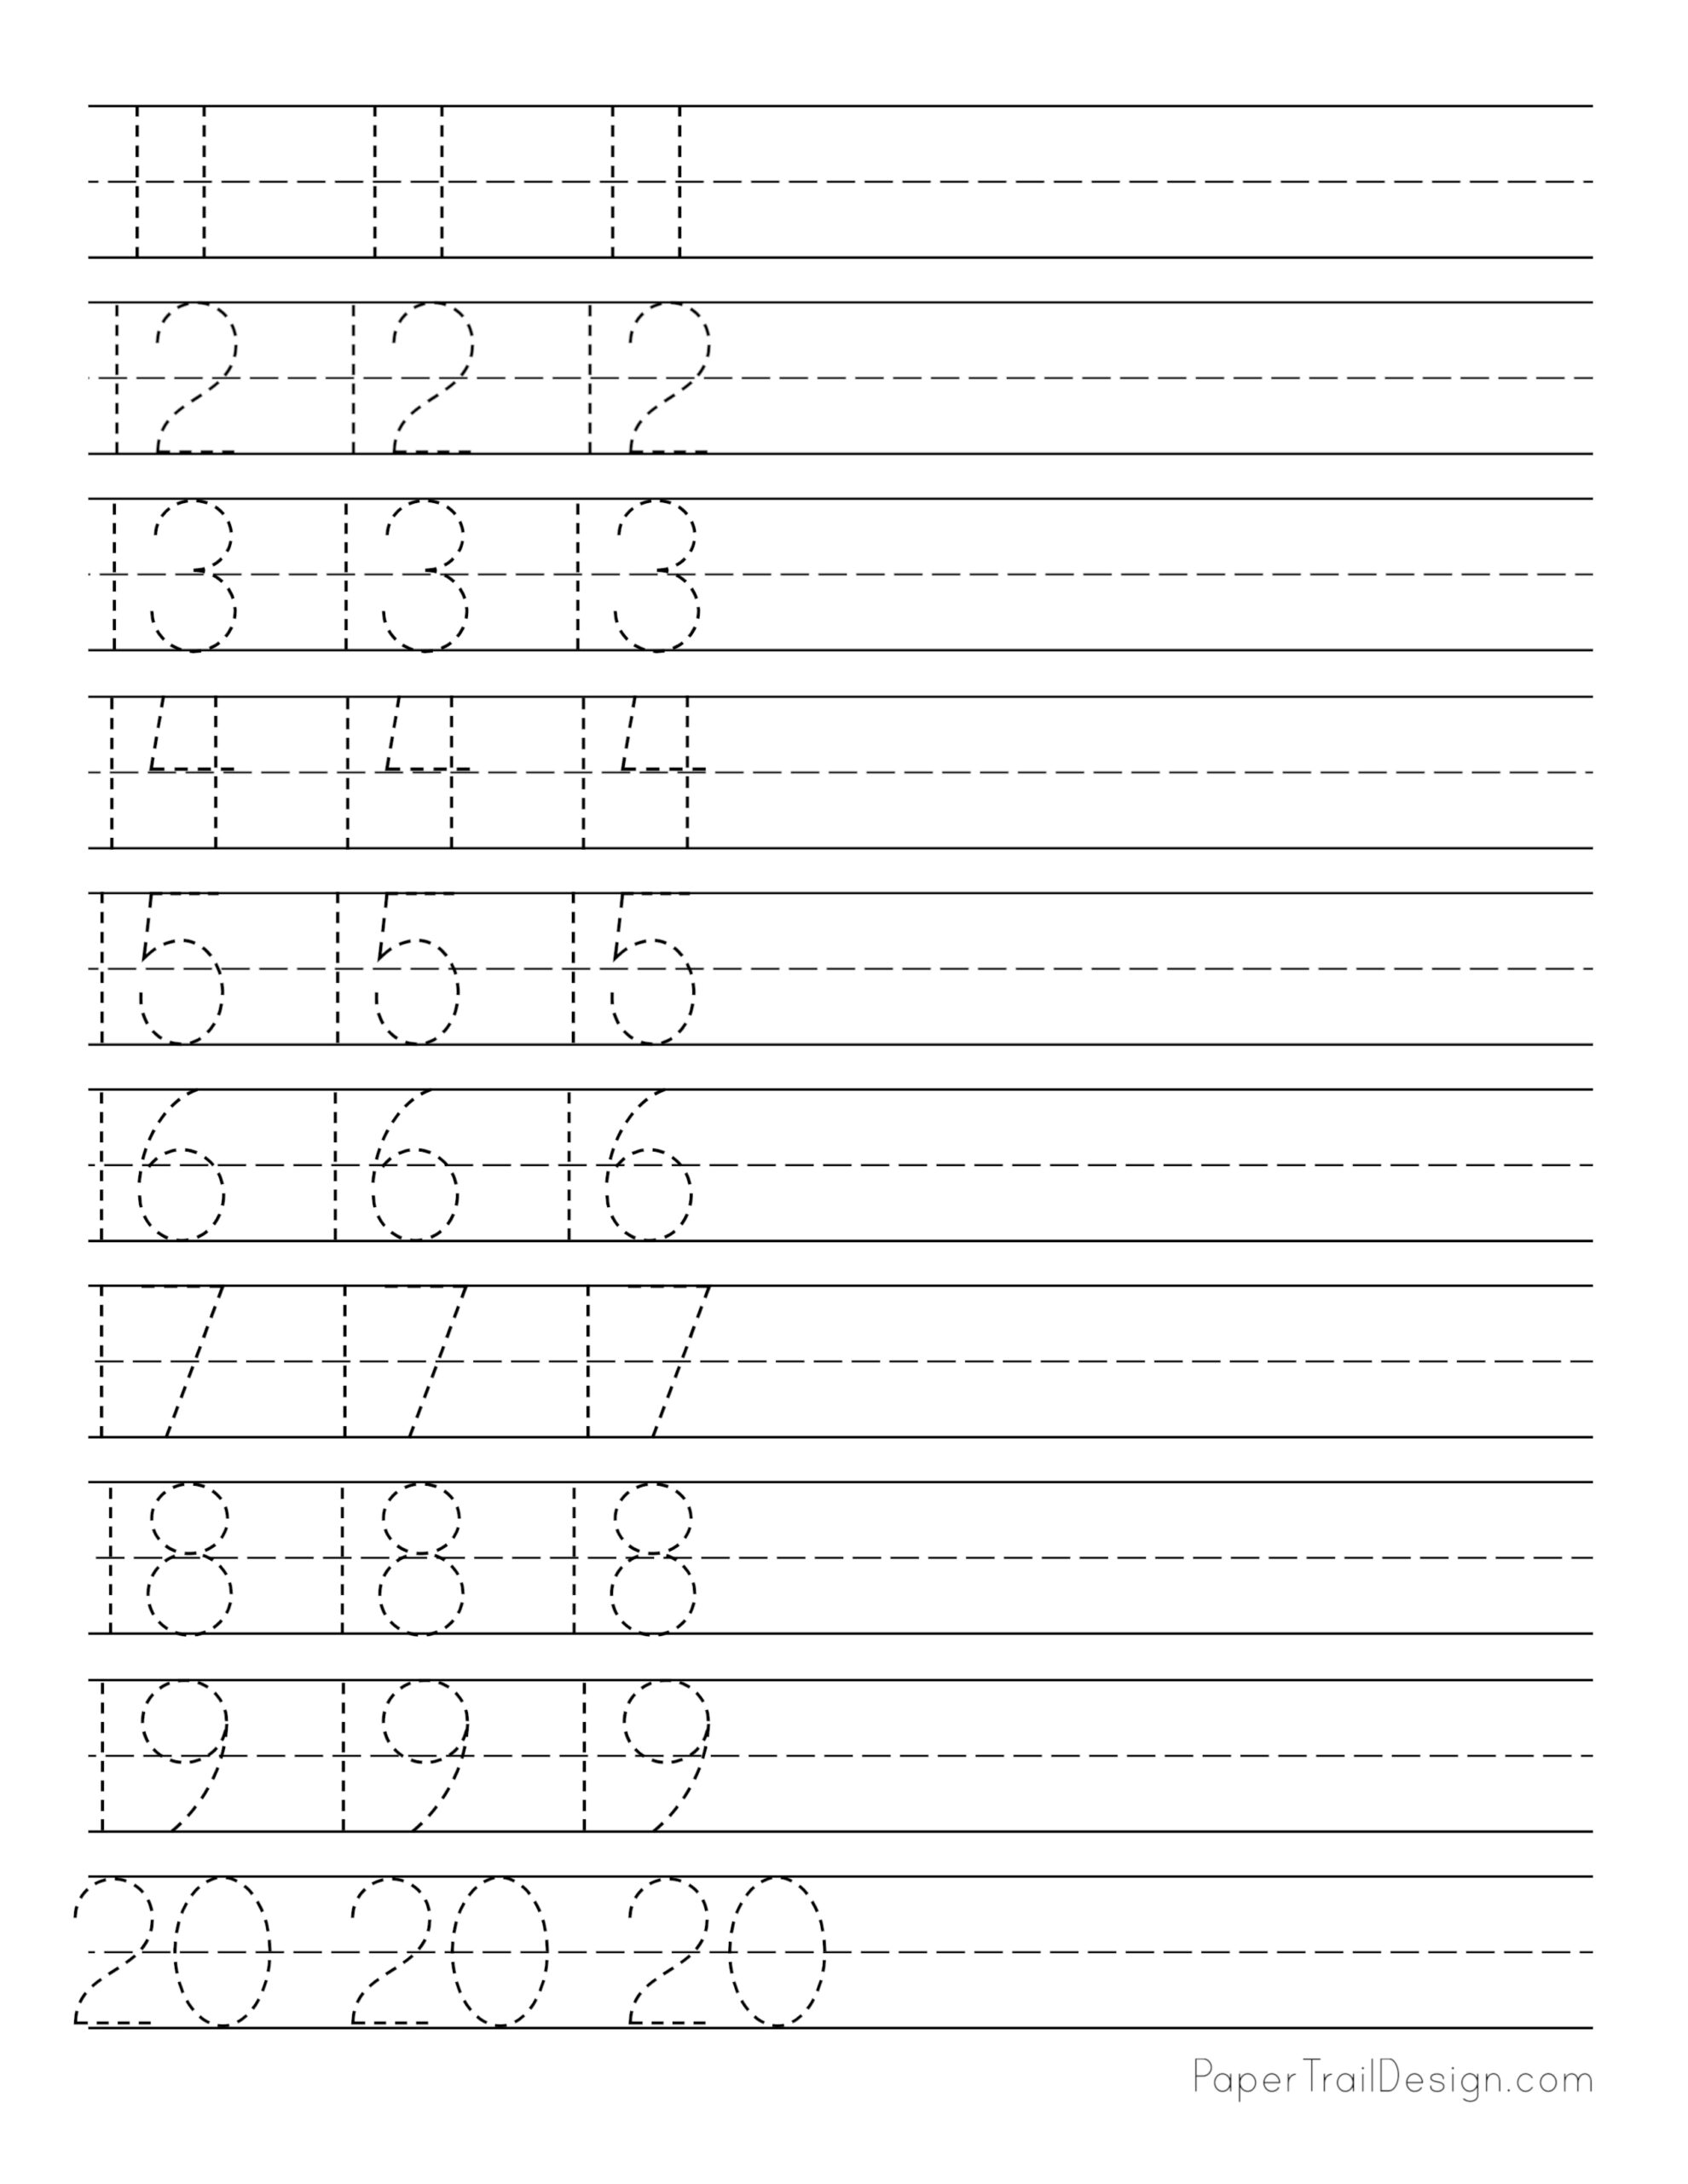 free-printable-worksheets-for-kids-dotted-numbers-to-trace-1-10